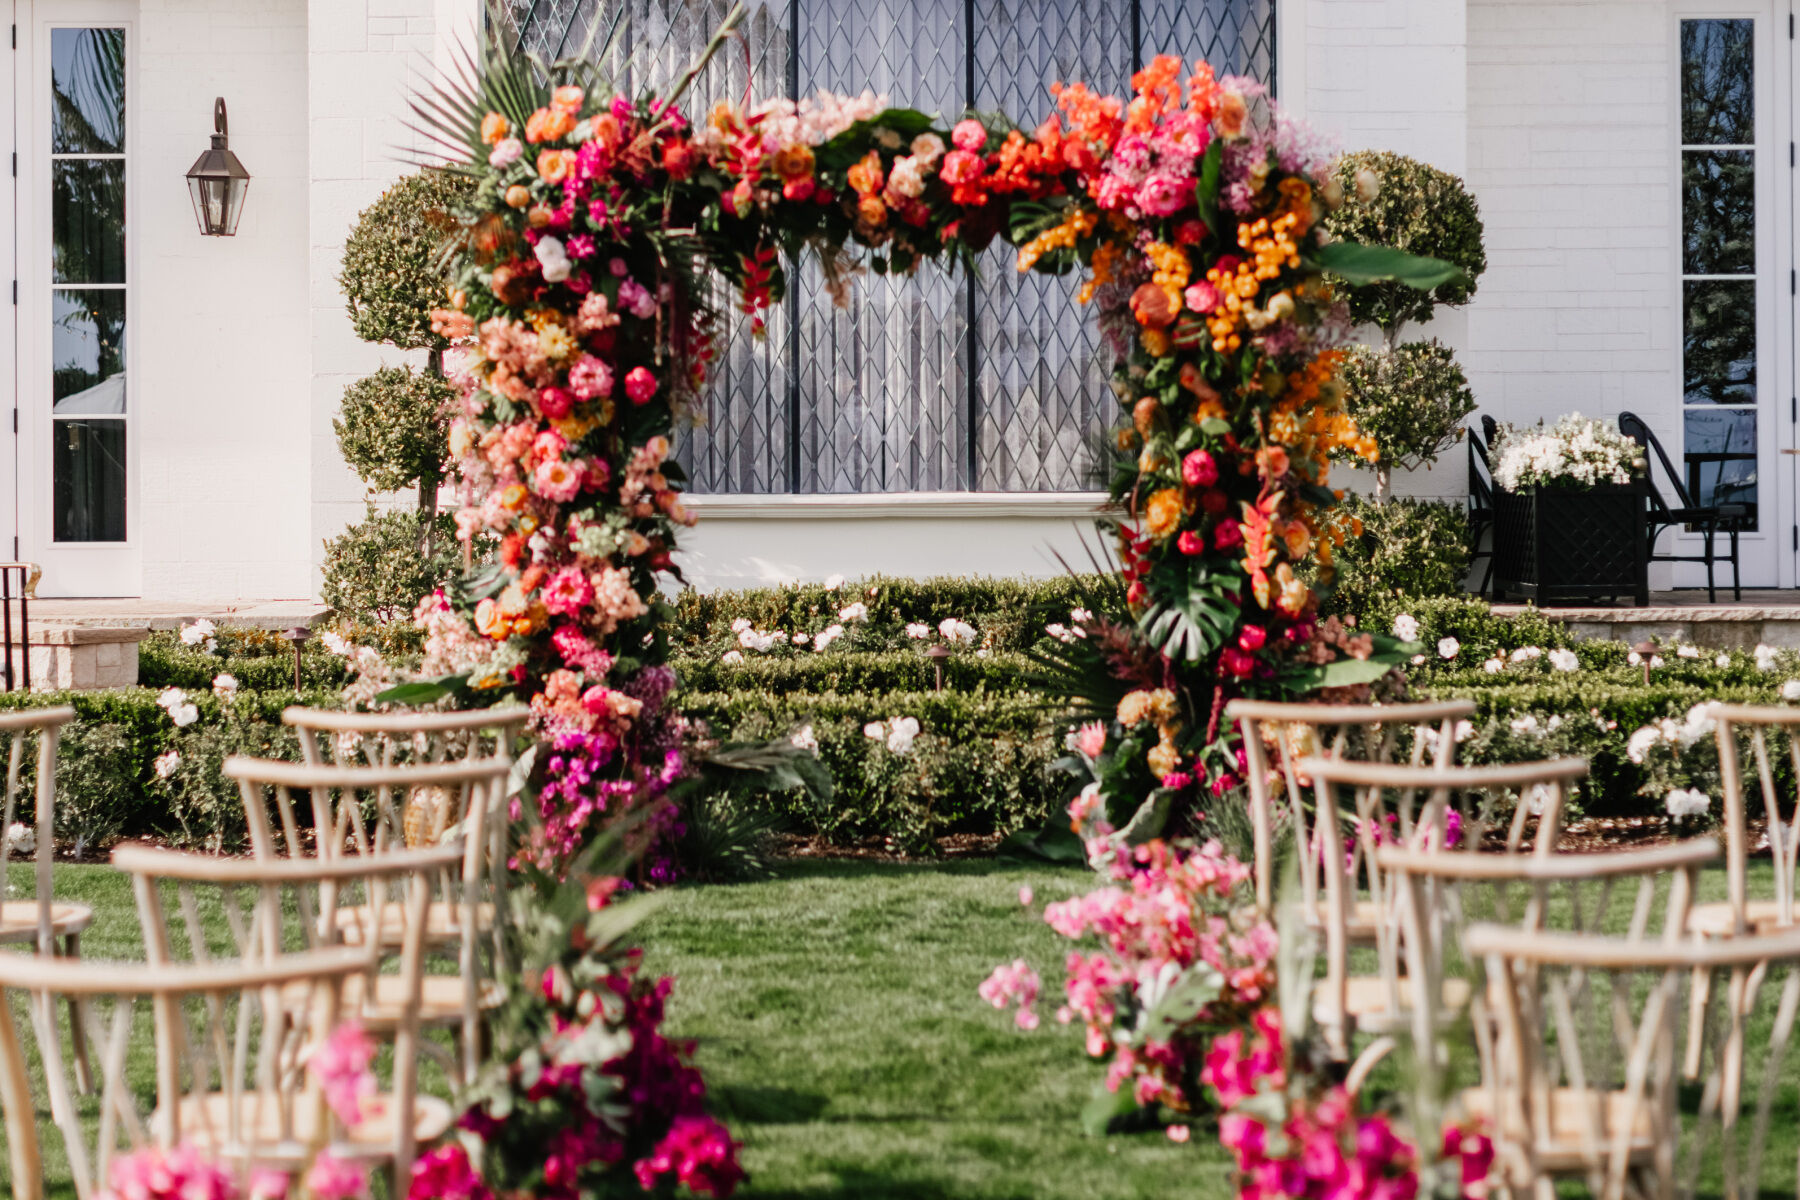 Colorful Wedding: A ceremony setup featuring a floral arch with pink and orange blooms and wooden chairs.